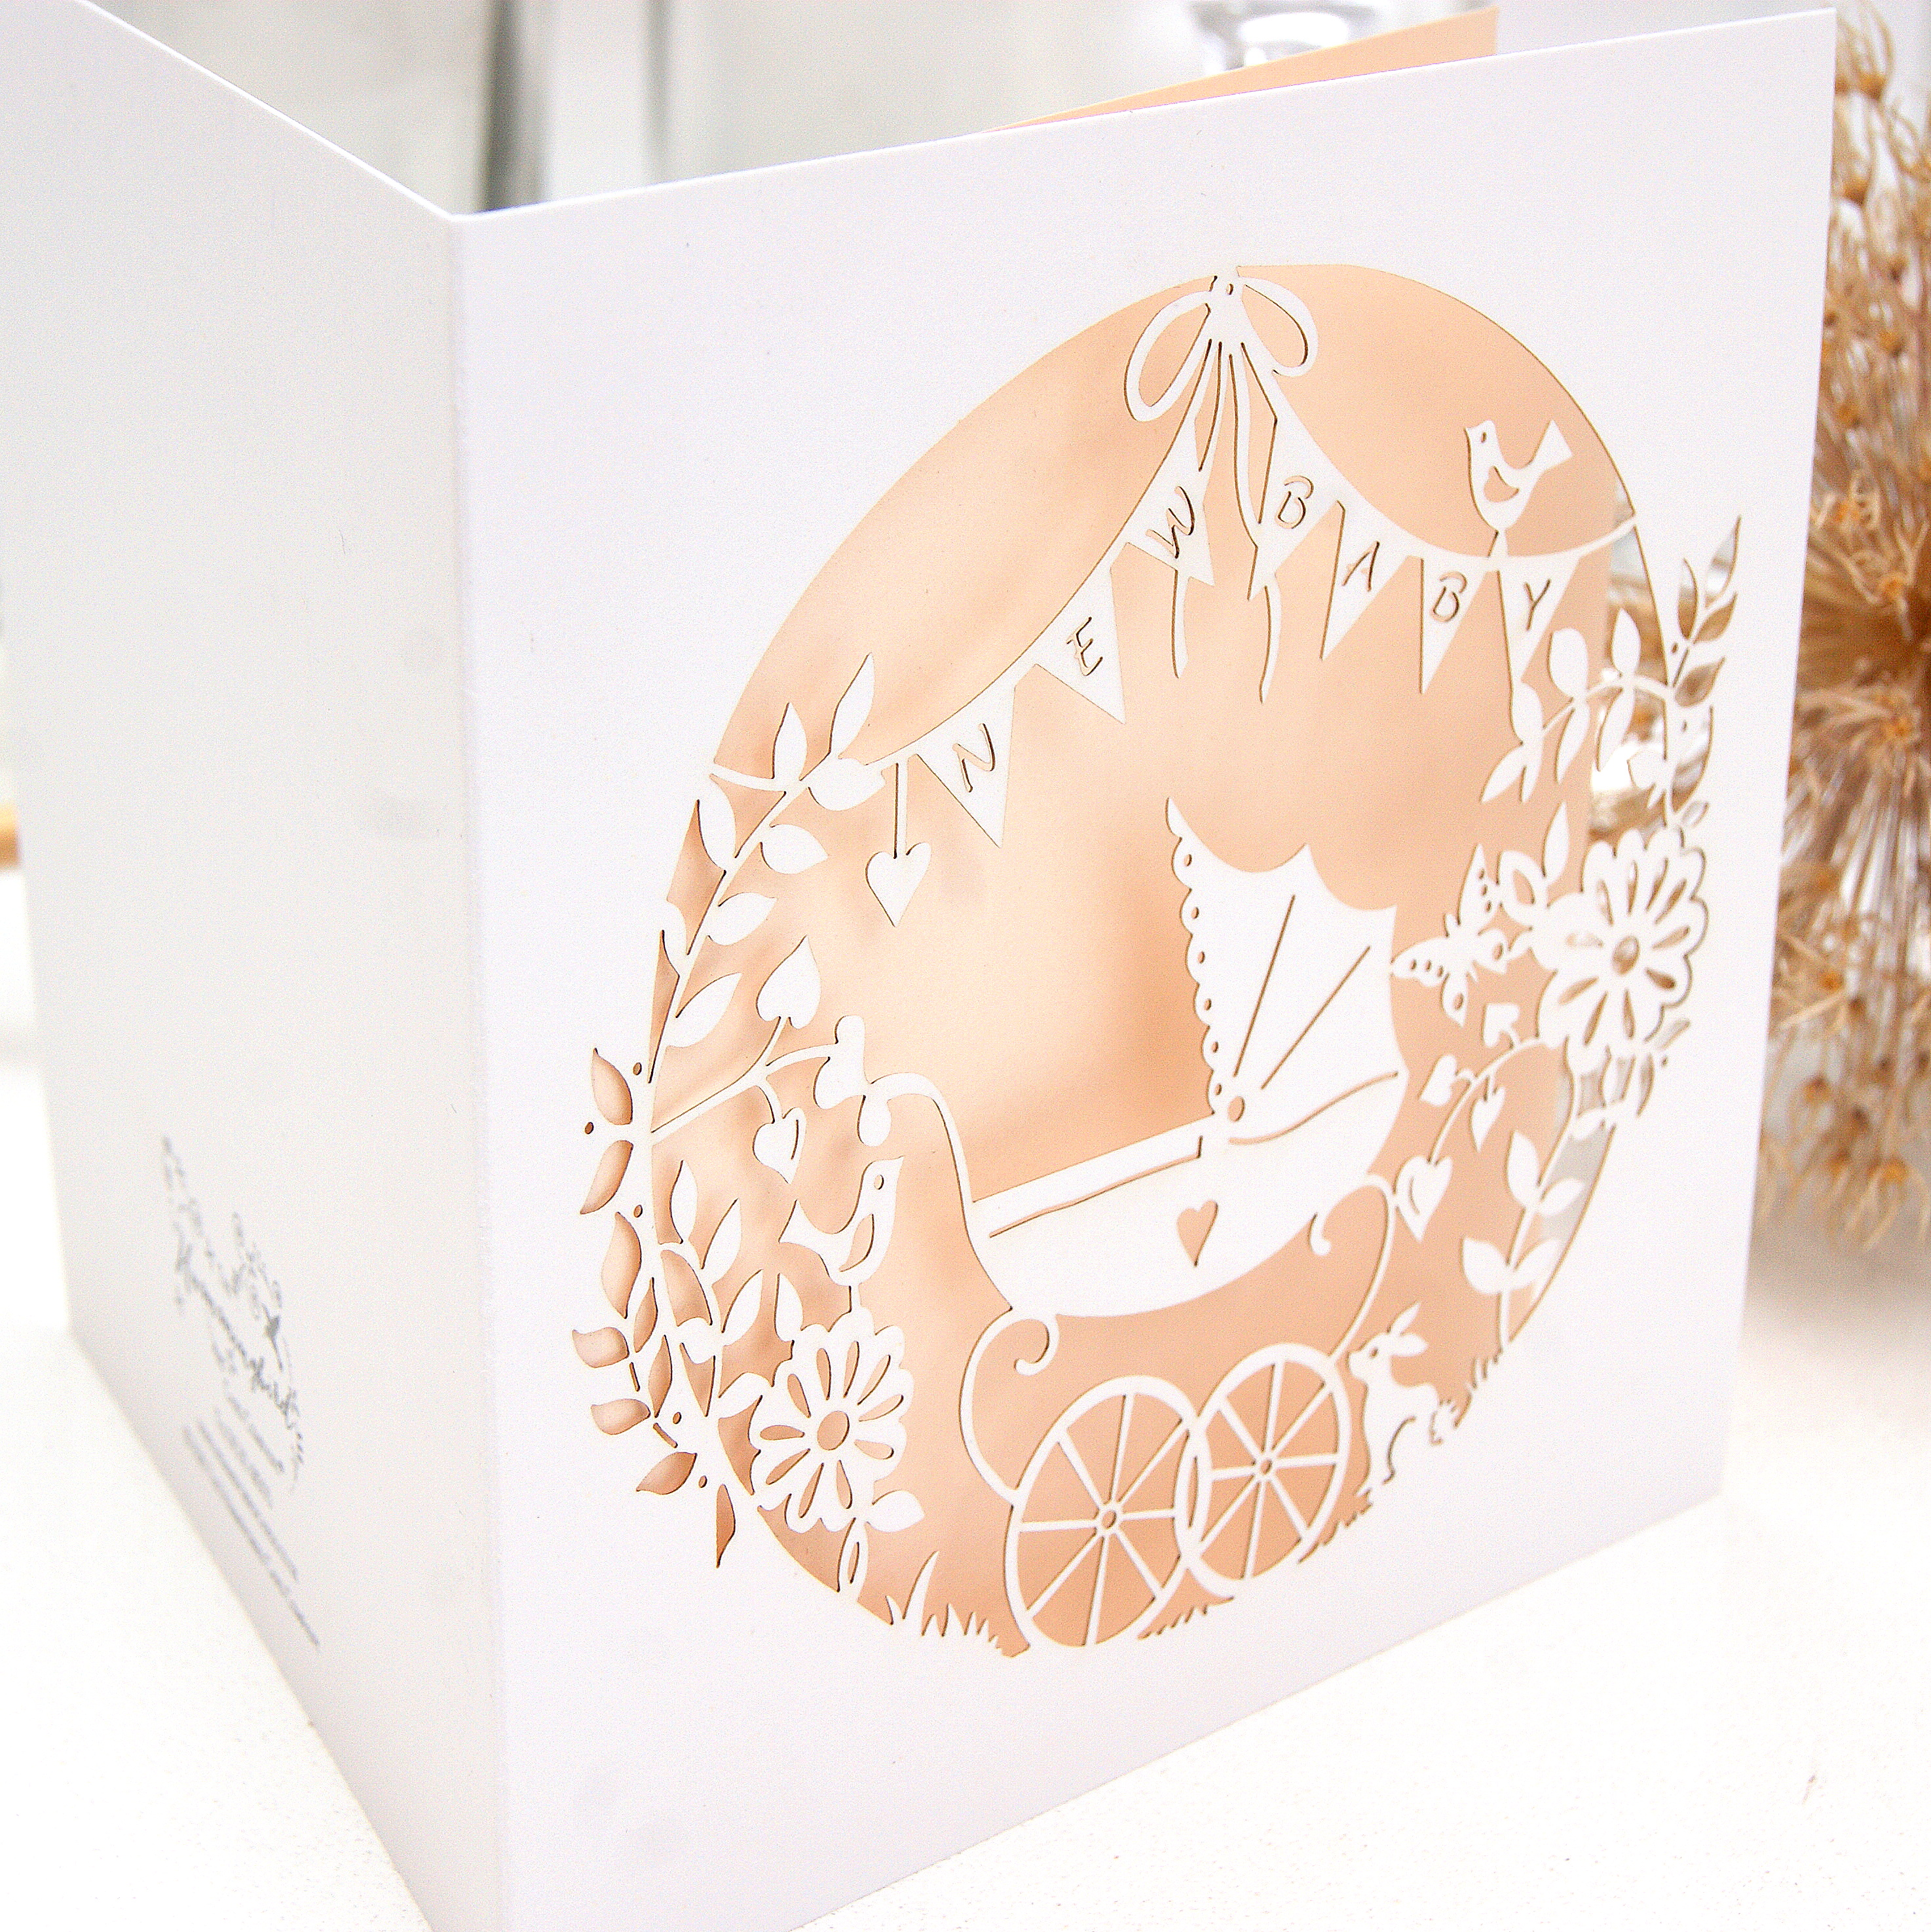 Laser cut new baby card in pale pink